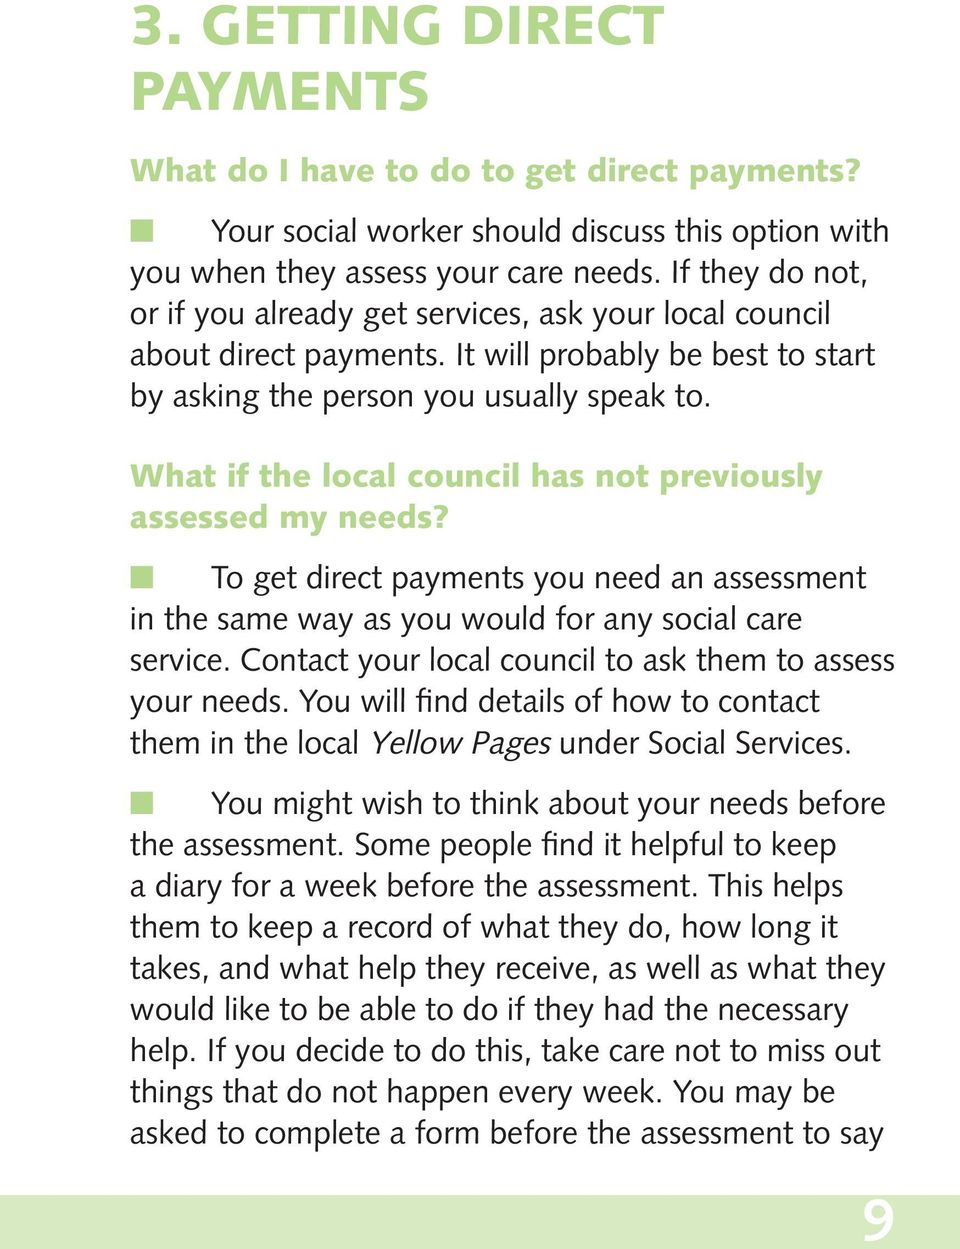 What if the local council has not previously assessed my needs? To get direct payments you need an assessment in the same way as you would for any social care service.